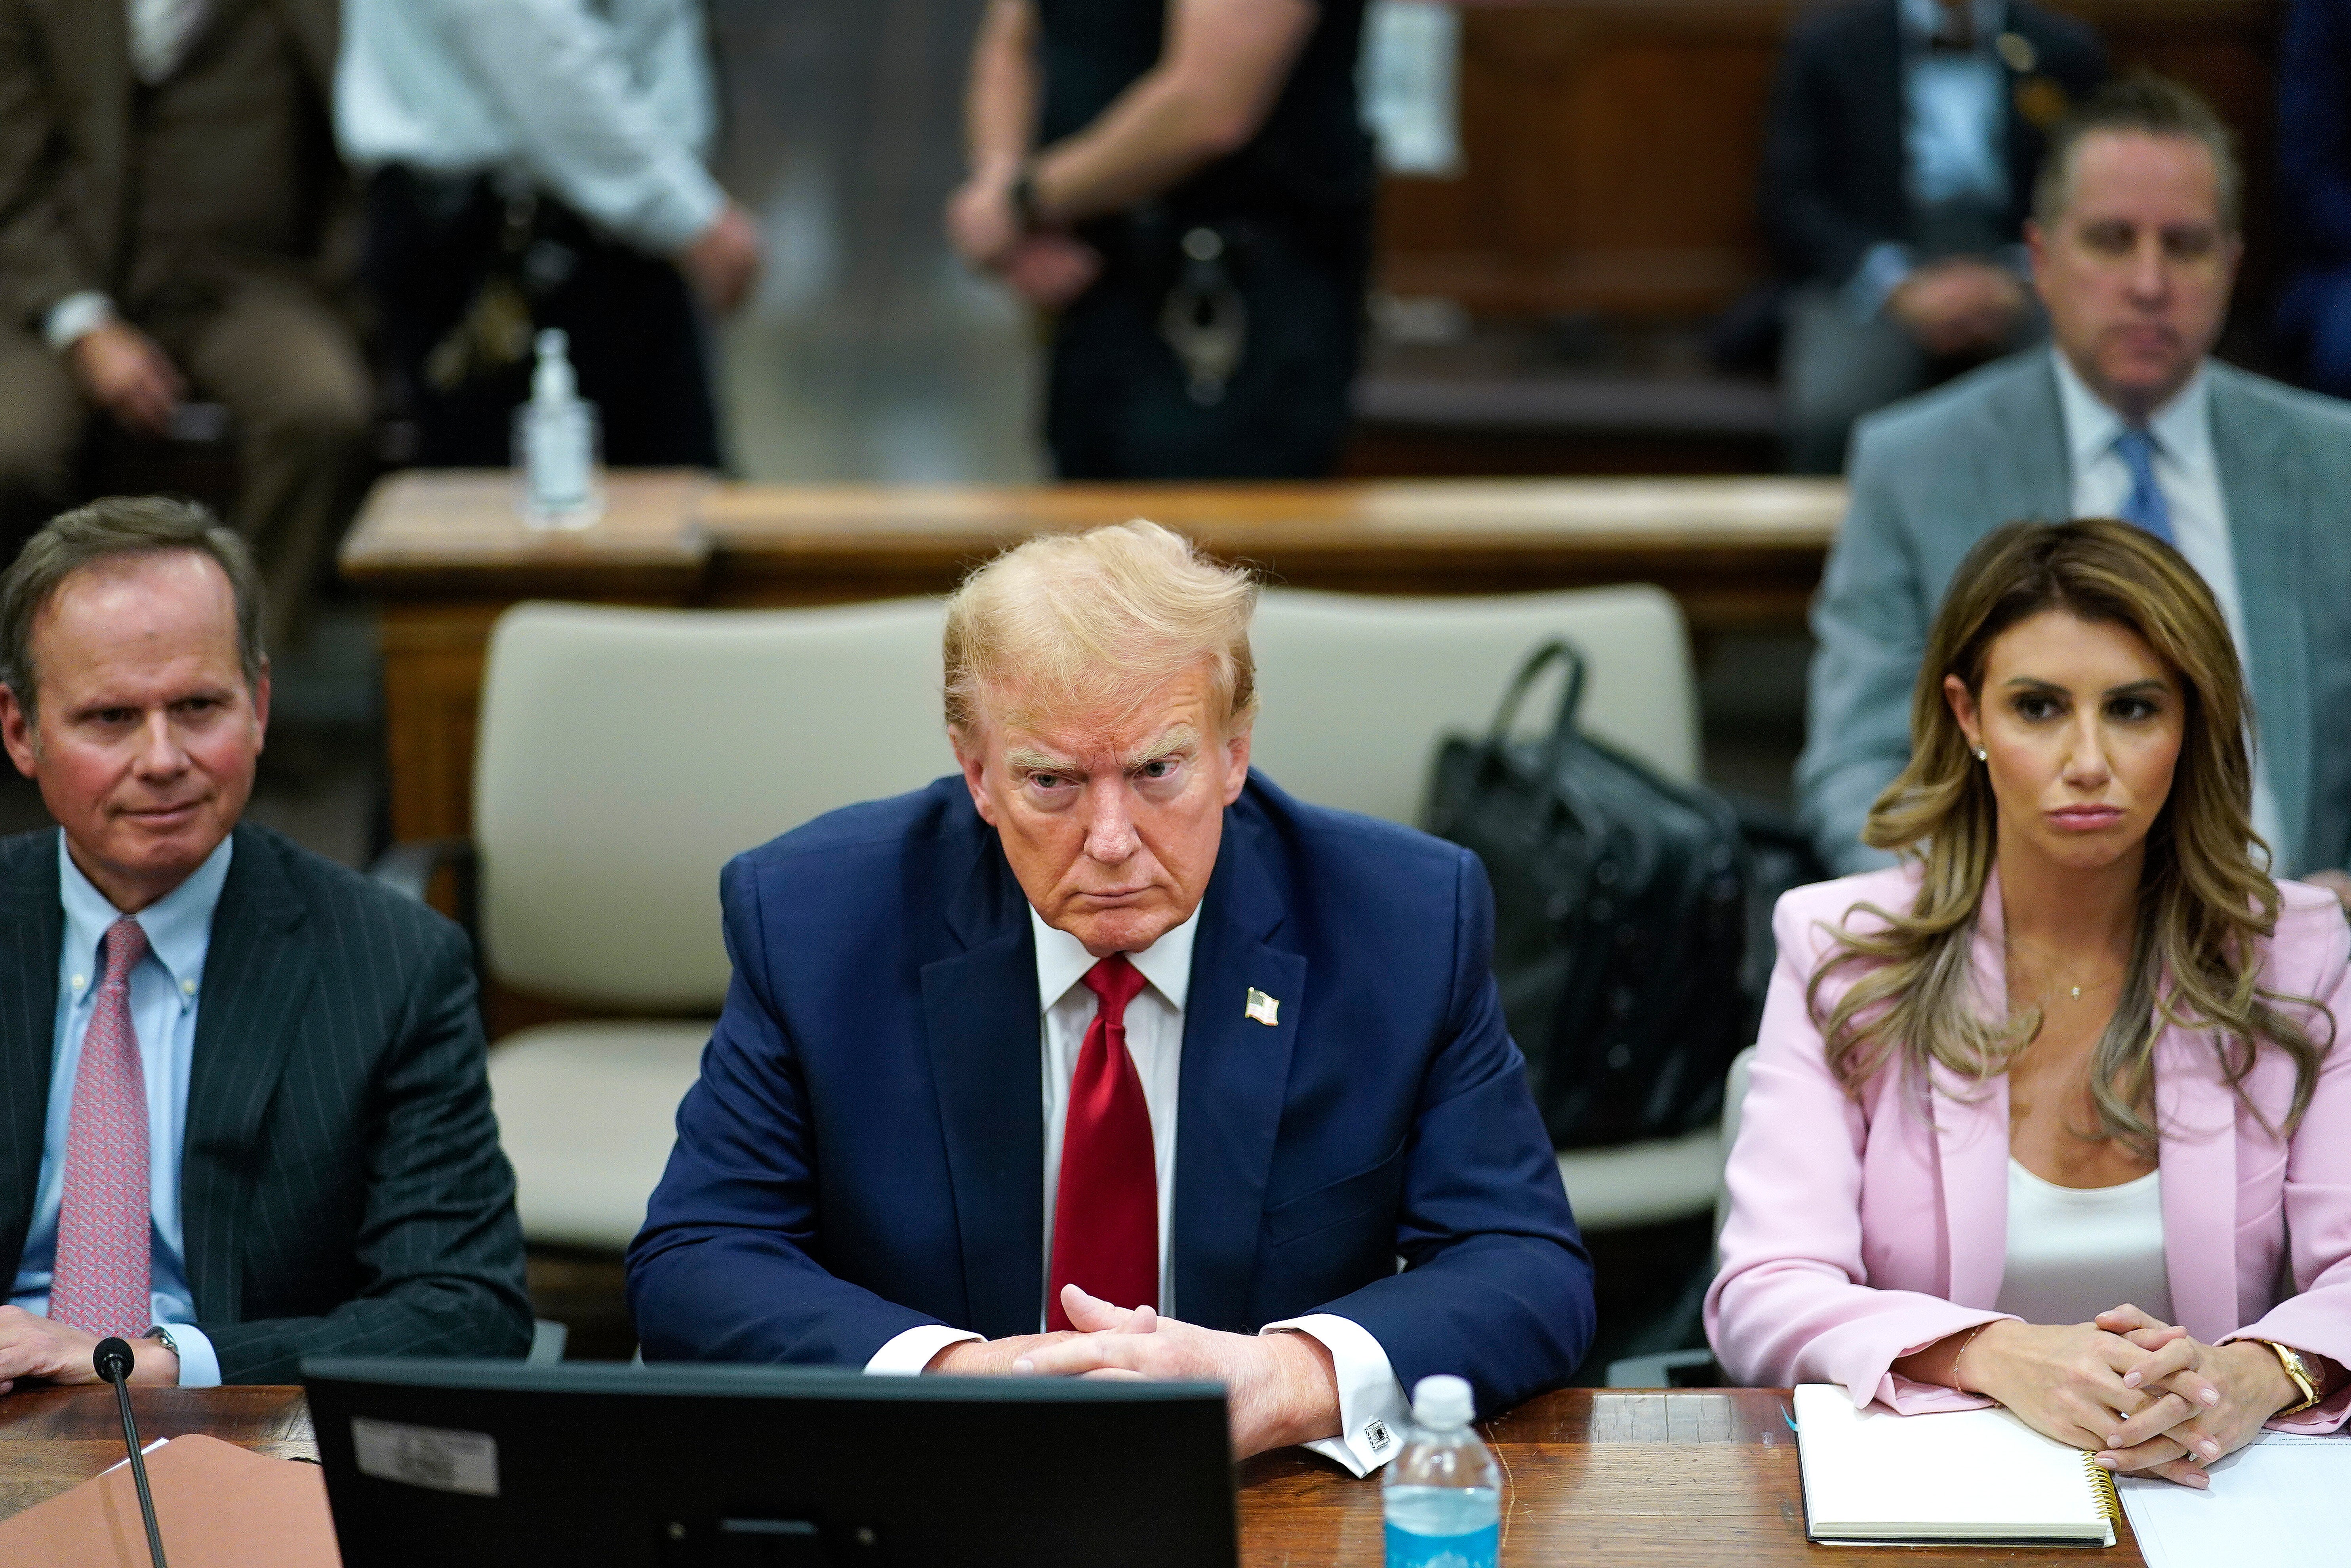 Donald Trump sits with his attorneys Chris Kise, left, and Alina Habba, right, during a civil fraud trial in New York on 7 December.